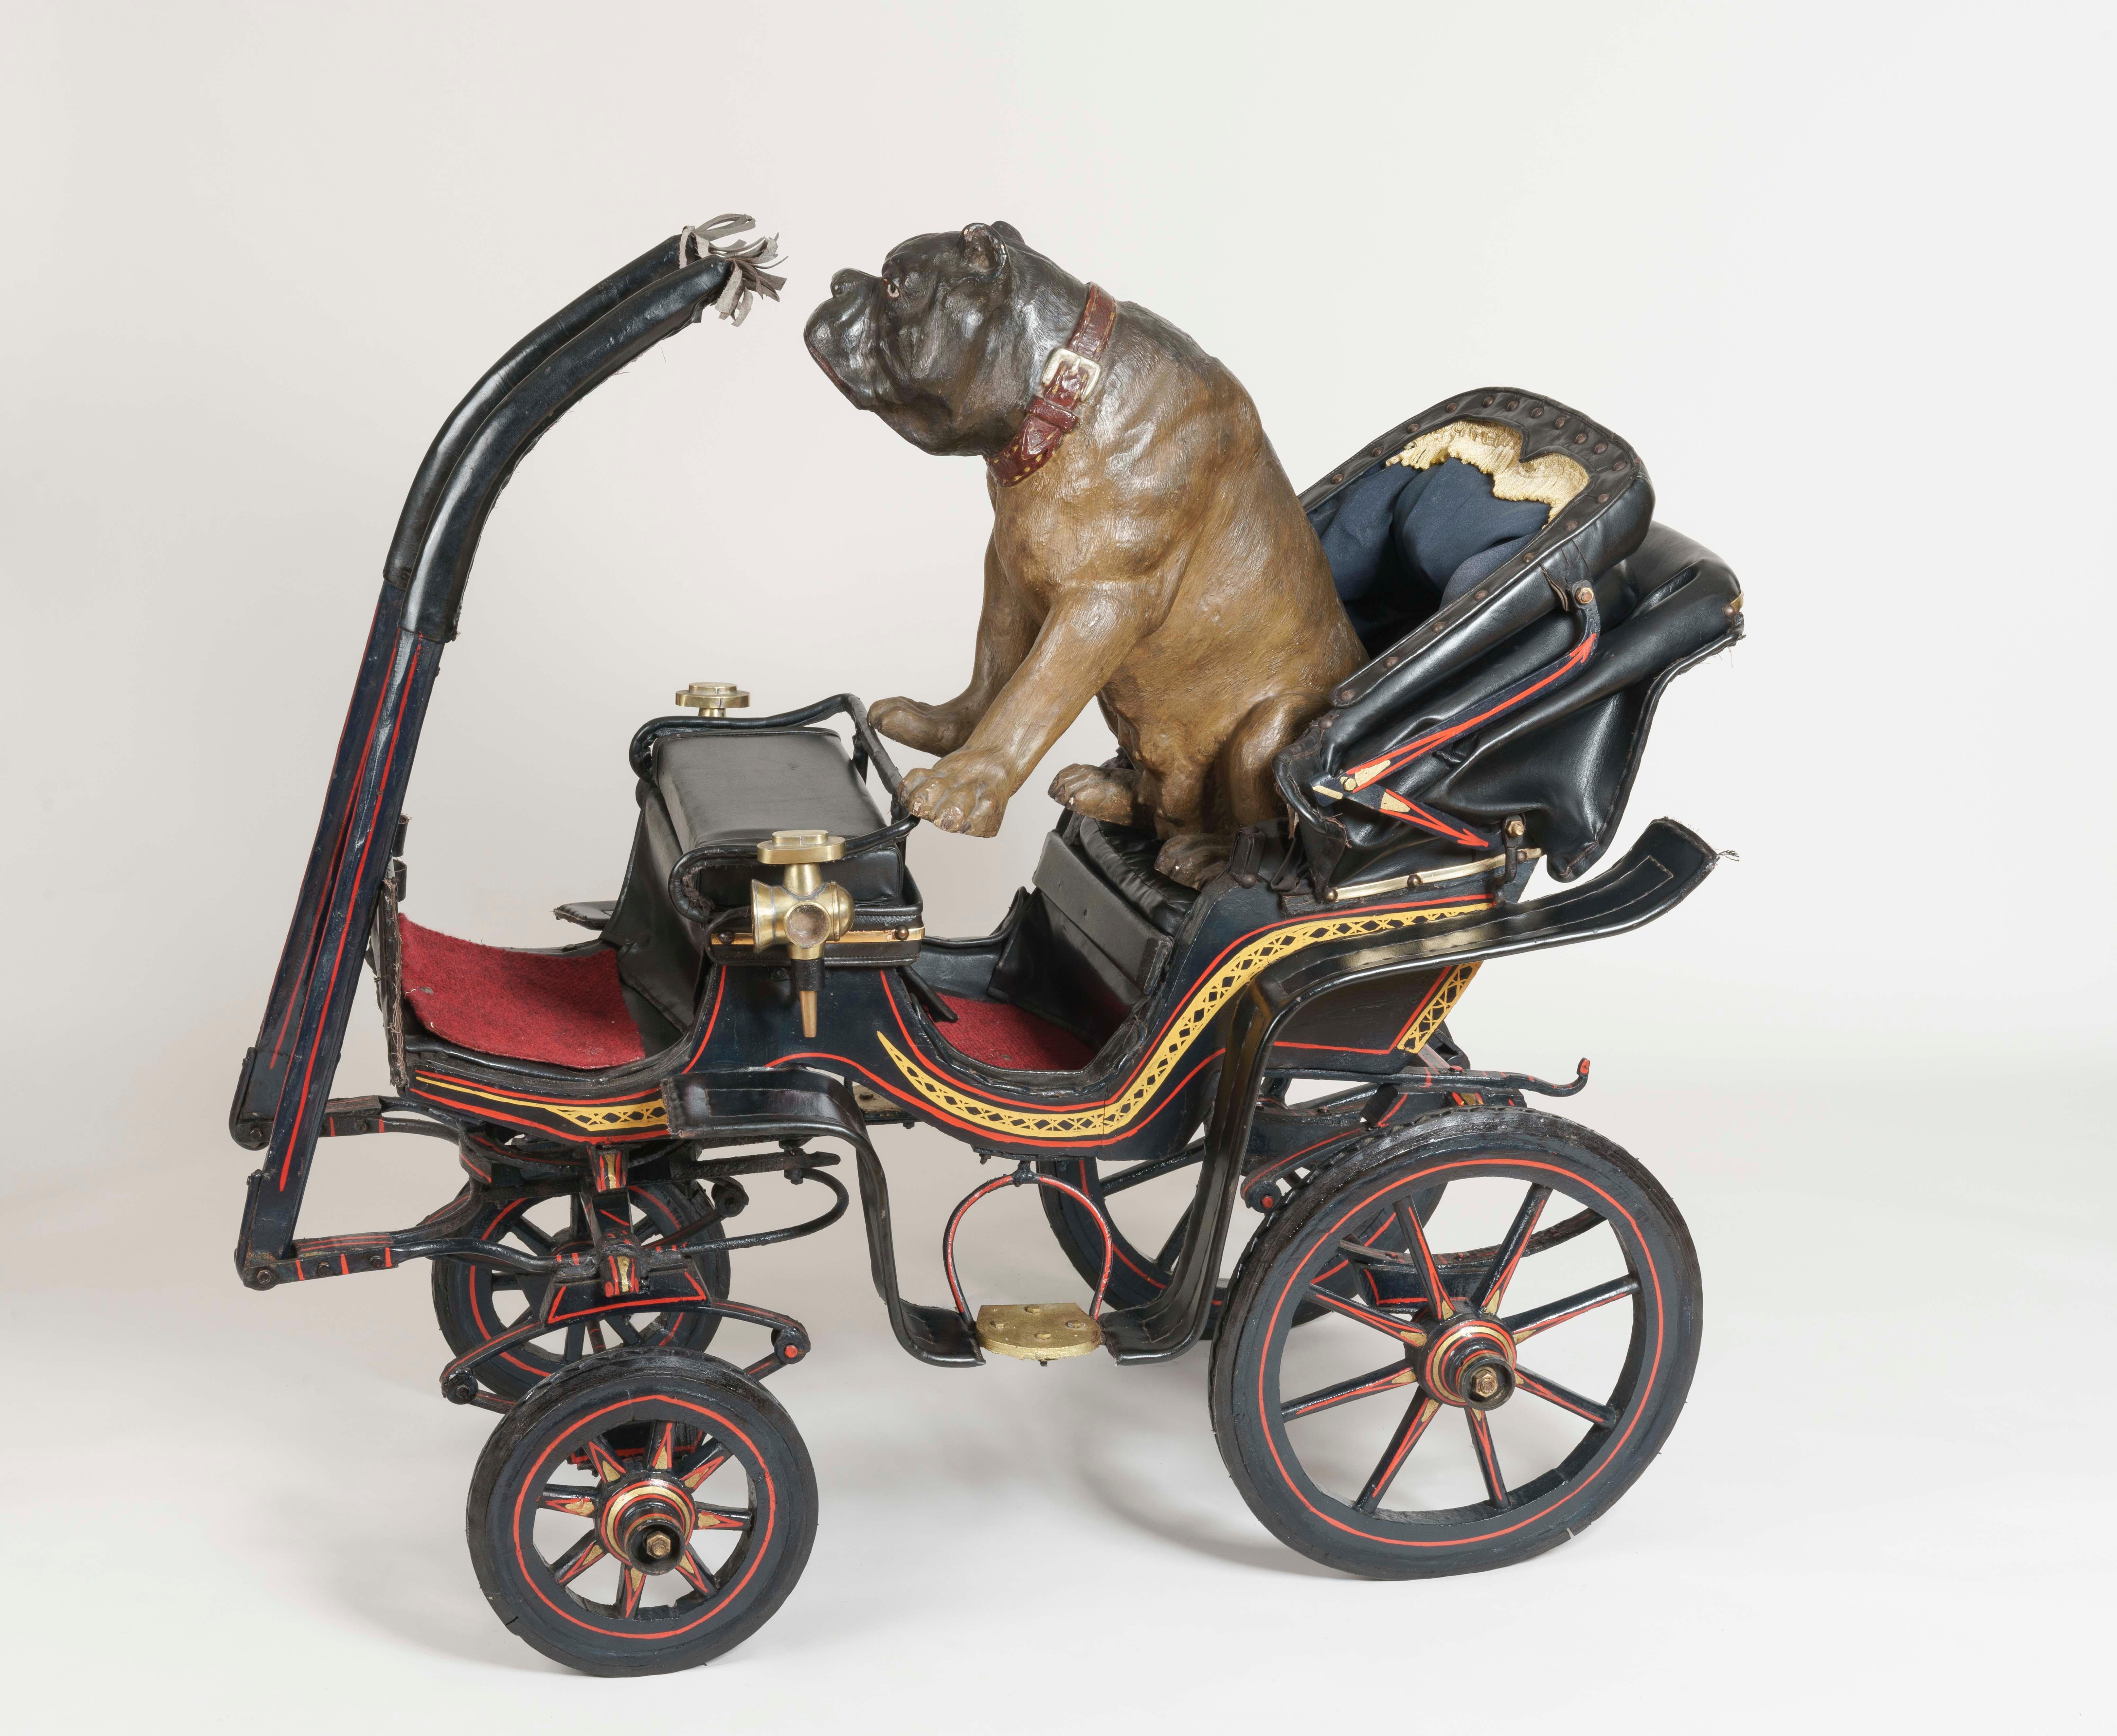 A Children’s Painted Calèche

Modelled on a full-sized barouche, this fully functional children’s carriage was either goat- or dog-drawn. The frame replicated in great detail, having hand-painted coachwork, brass carriage lamps, a studded leather